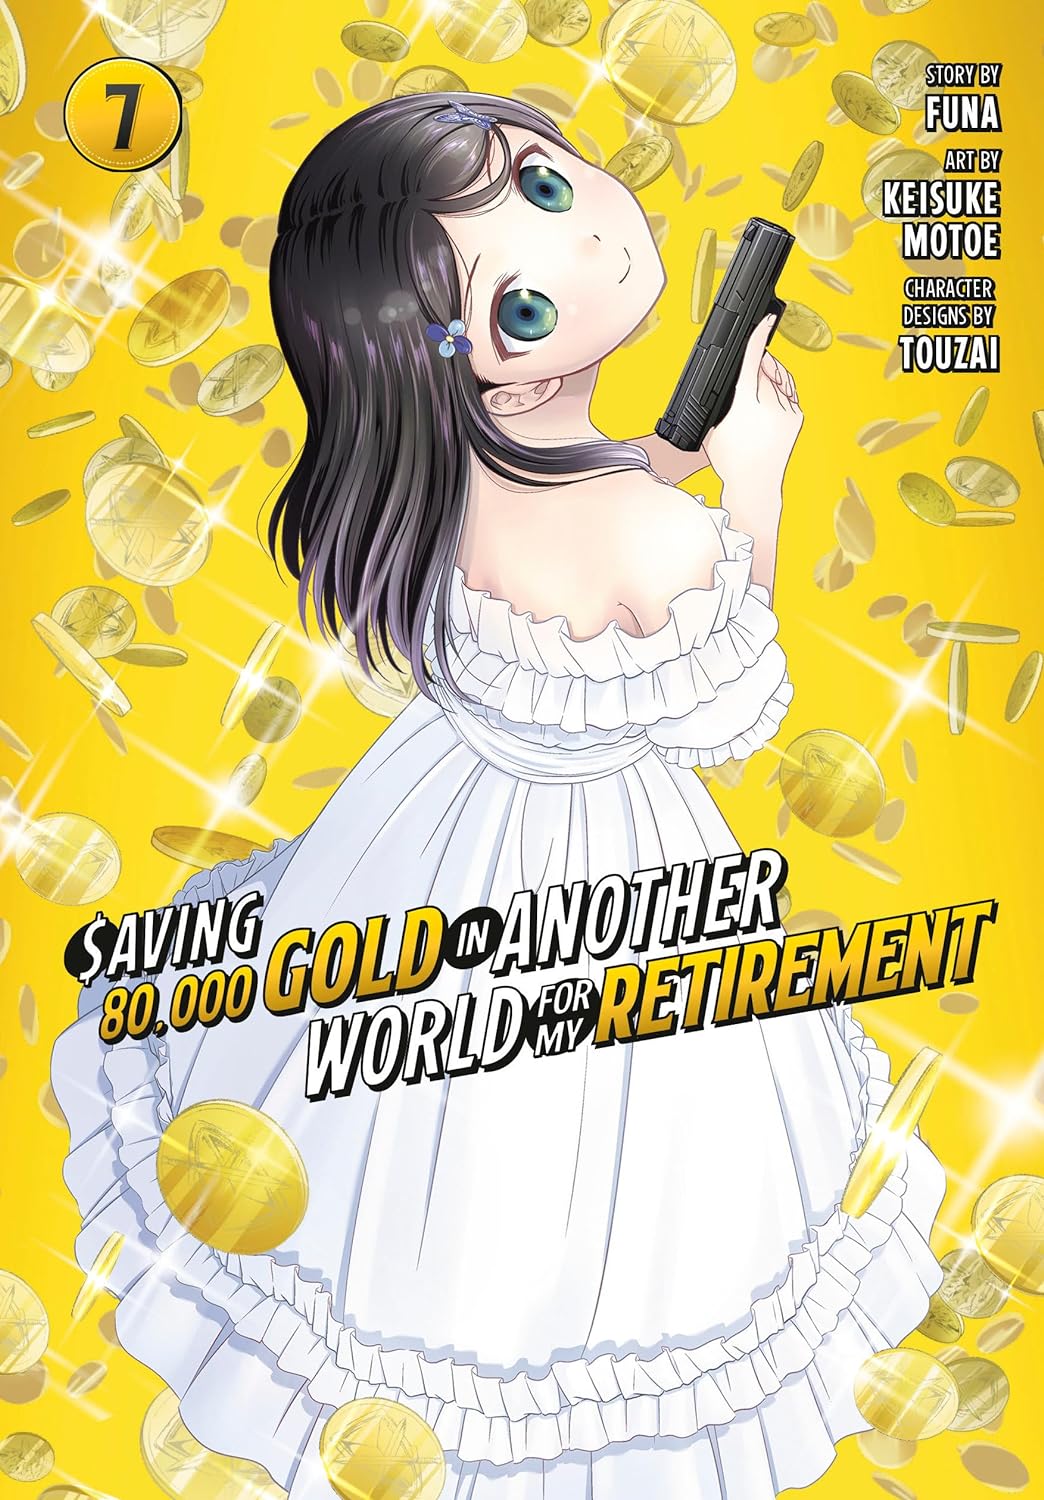 (11/06/2024) Saving 80,000 Gold in Another World for My Retirement (Manga) Vol. 07